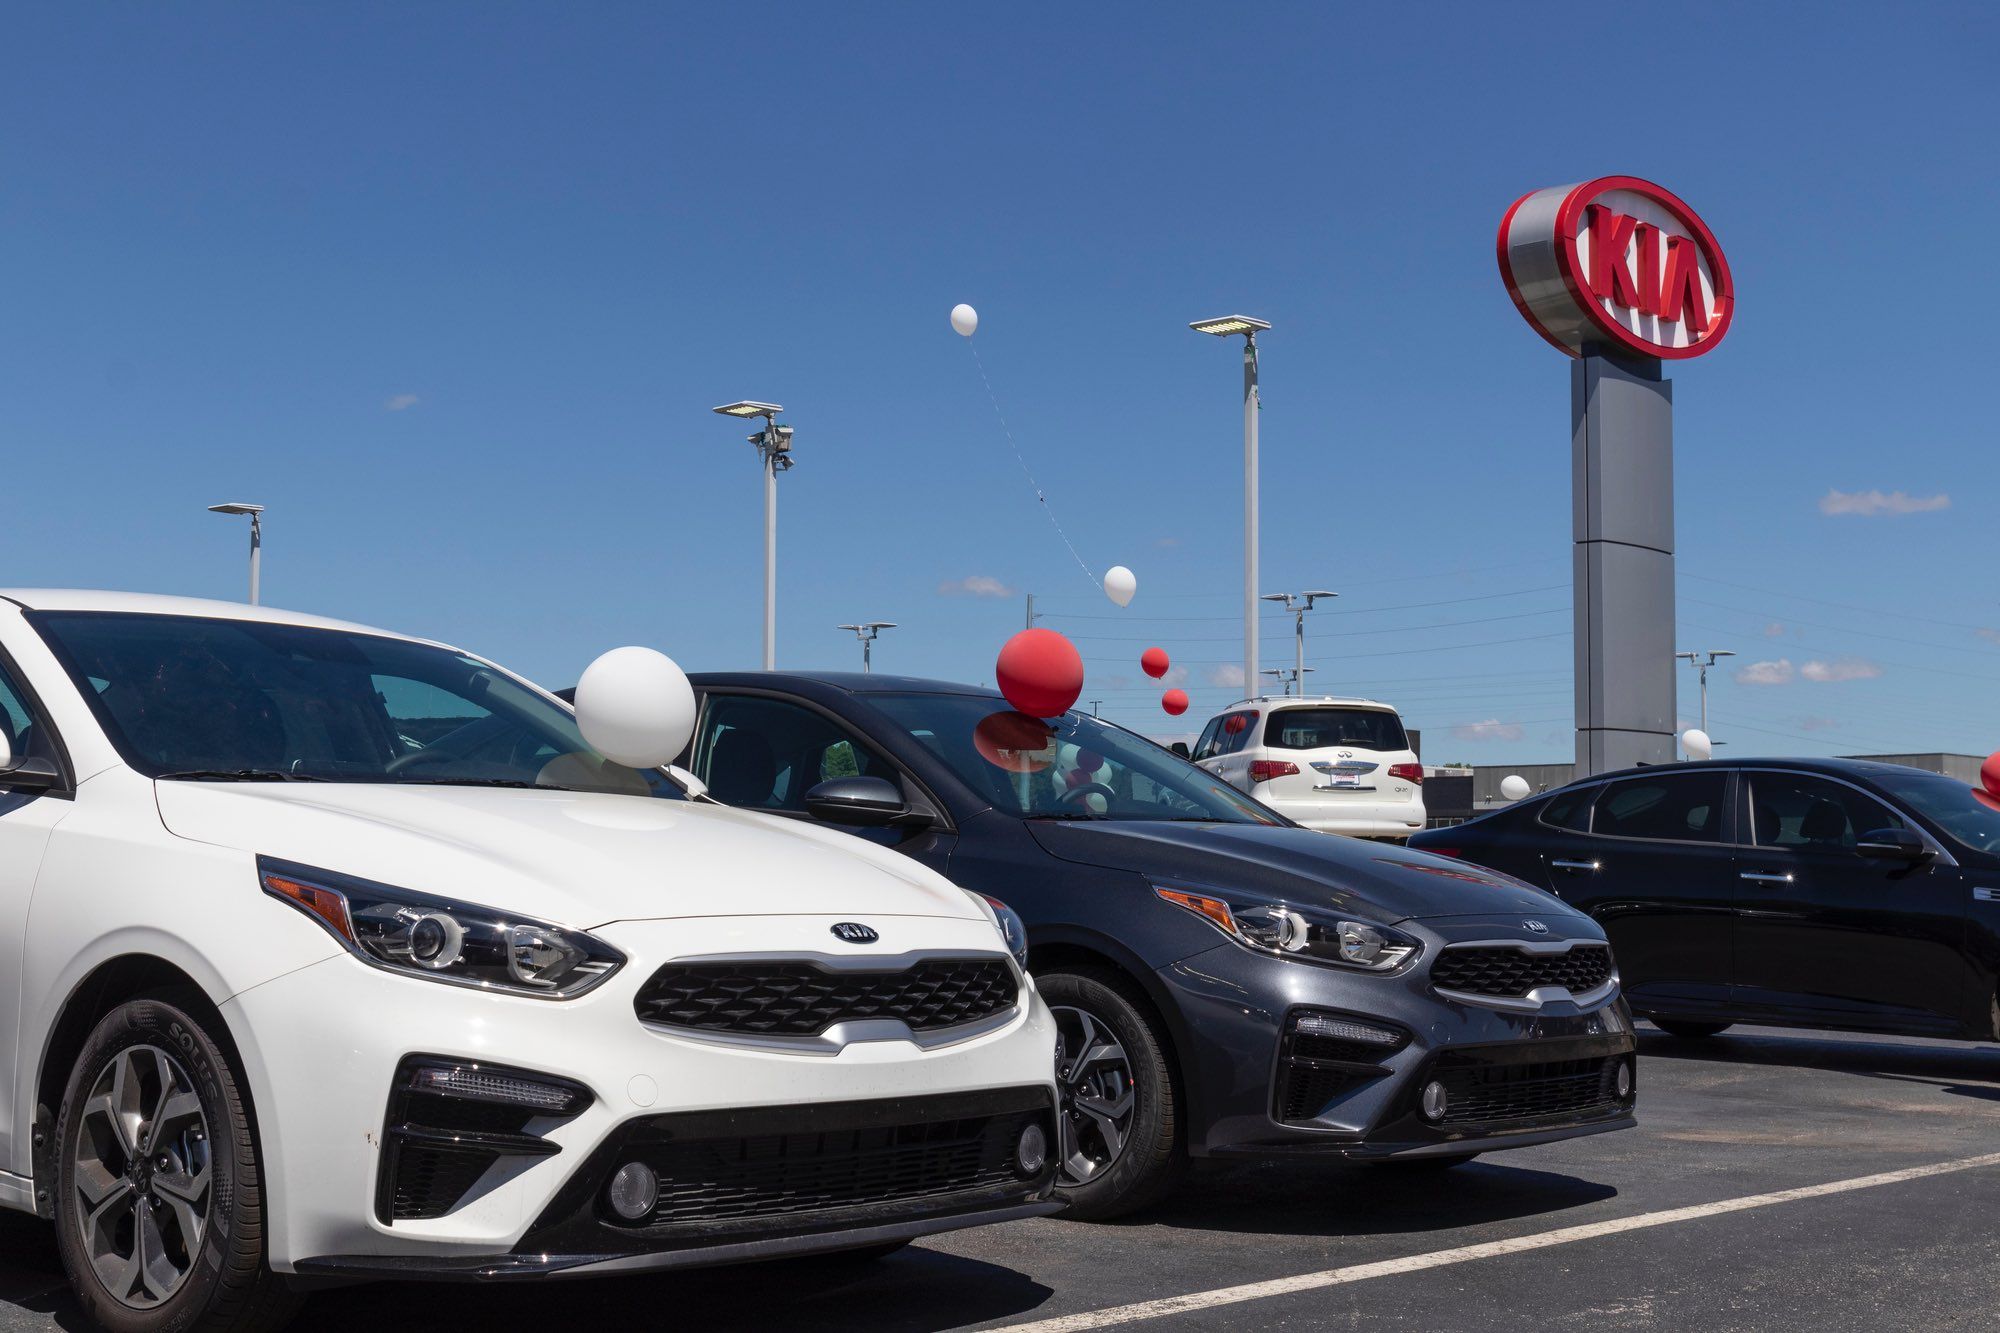 Kia Canada Named in Class Action Lawsuit Over Dangerous Sunroofs Top